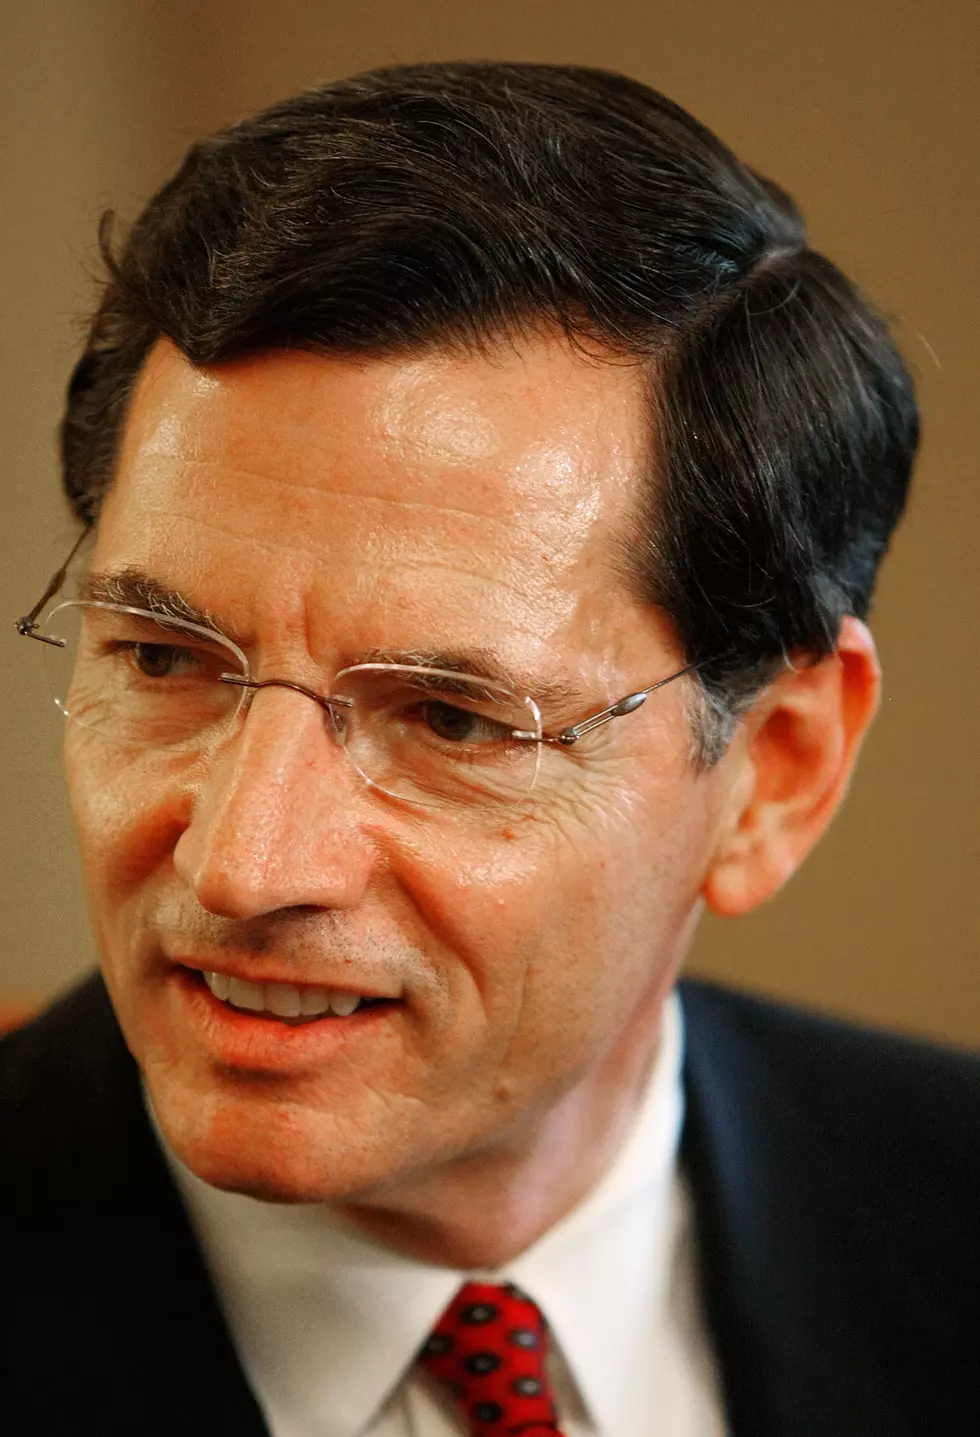 Barrasso Wants Individuals to Get Health Care Waiver [AUDIO]